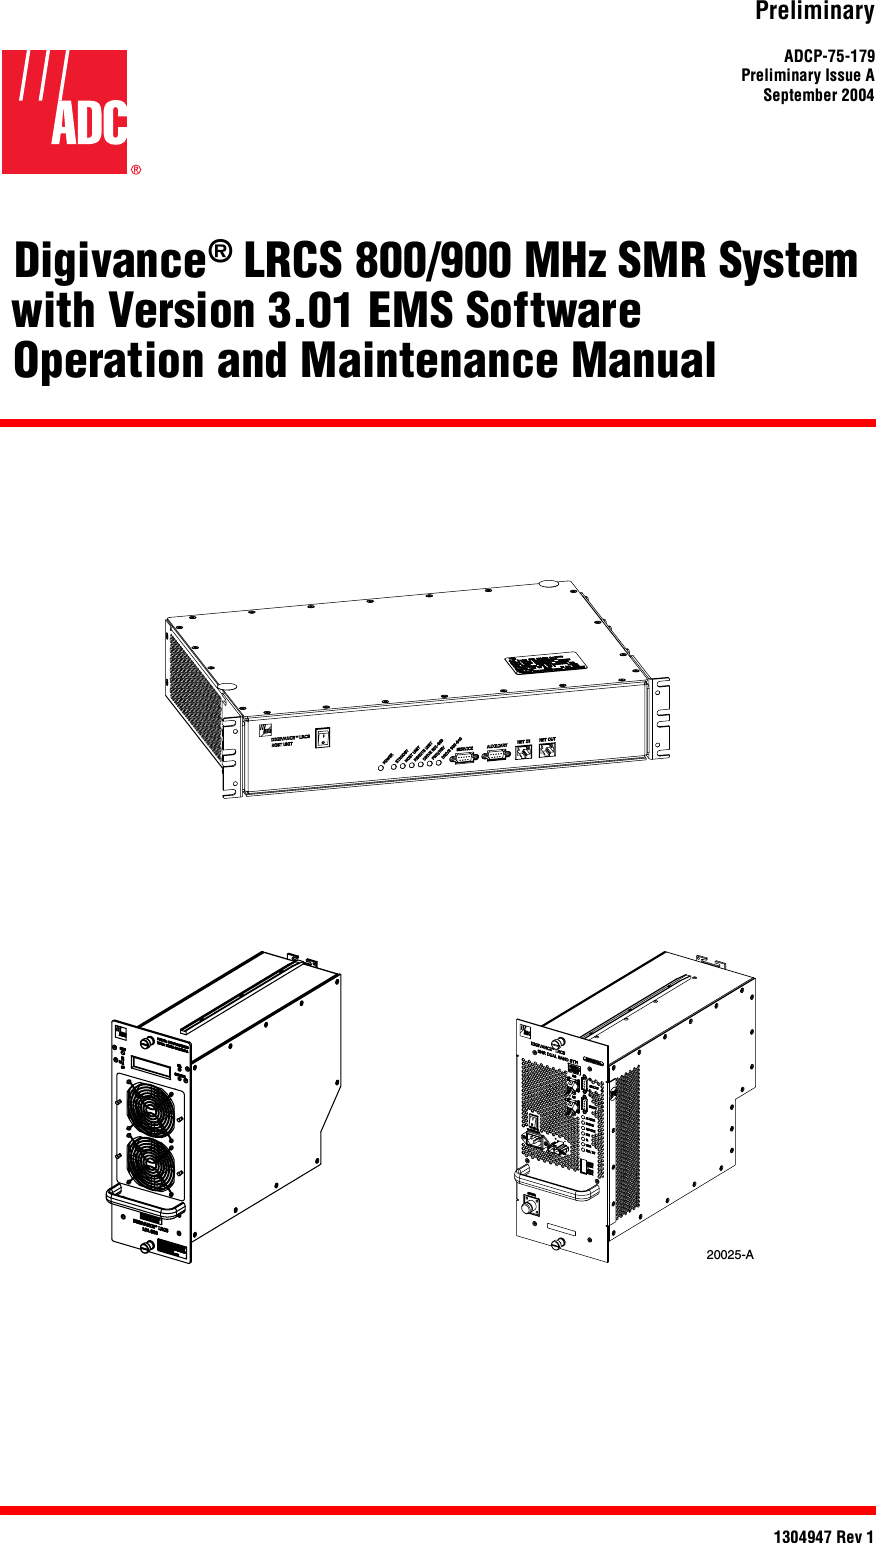 PreliminaryADCP-75-179Preliminary Issue ASeptember 20041304947 Rev 1(Digivance® LRCS 800/900 MHz SMR System  with Version 3.01 EMS Software(Operation and Maintenance Manual20025-A